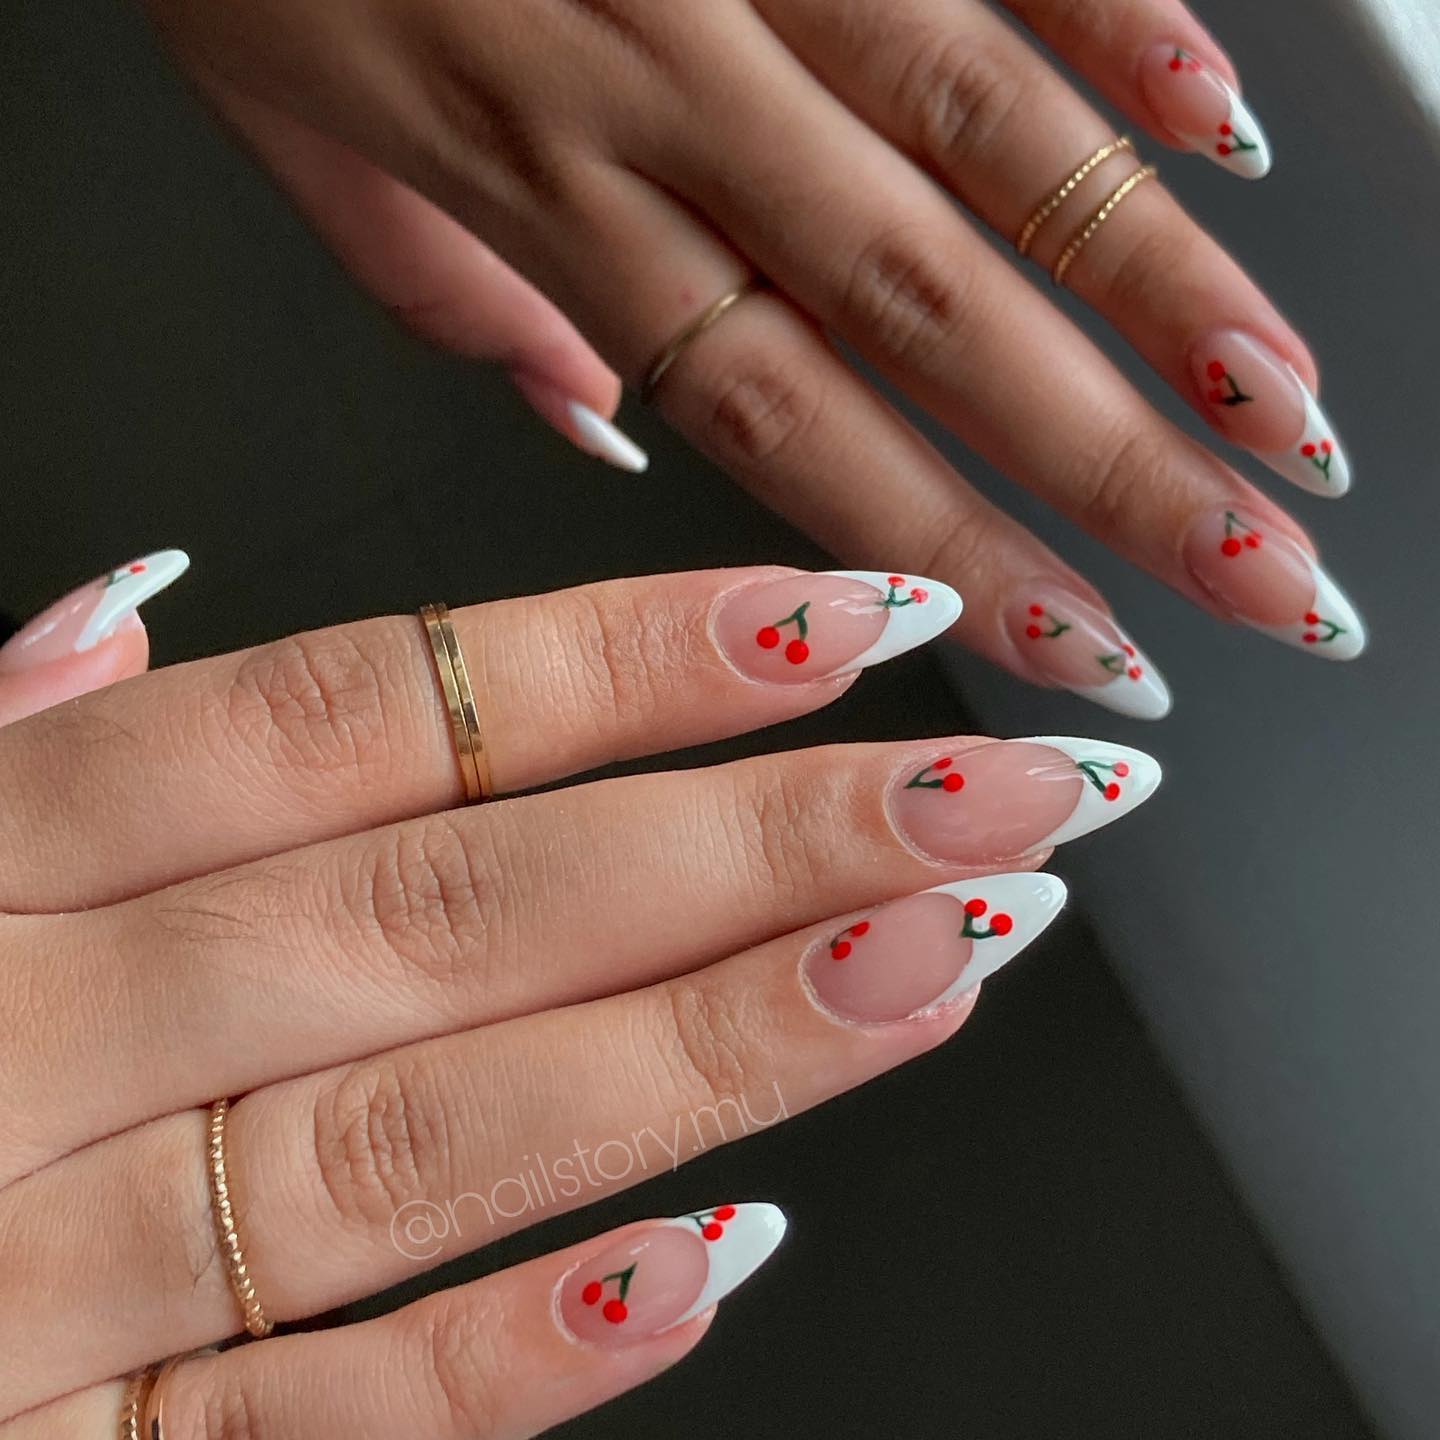 Long French Nails with Cherries